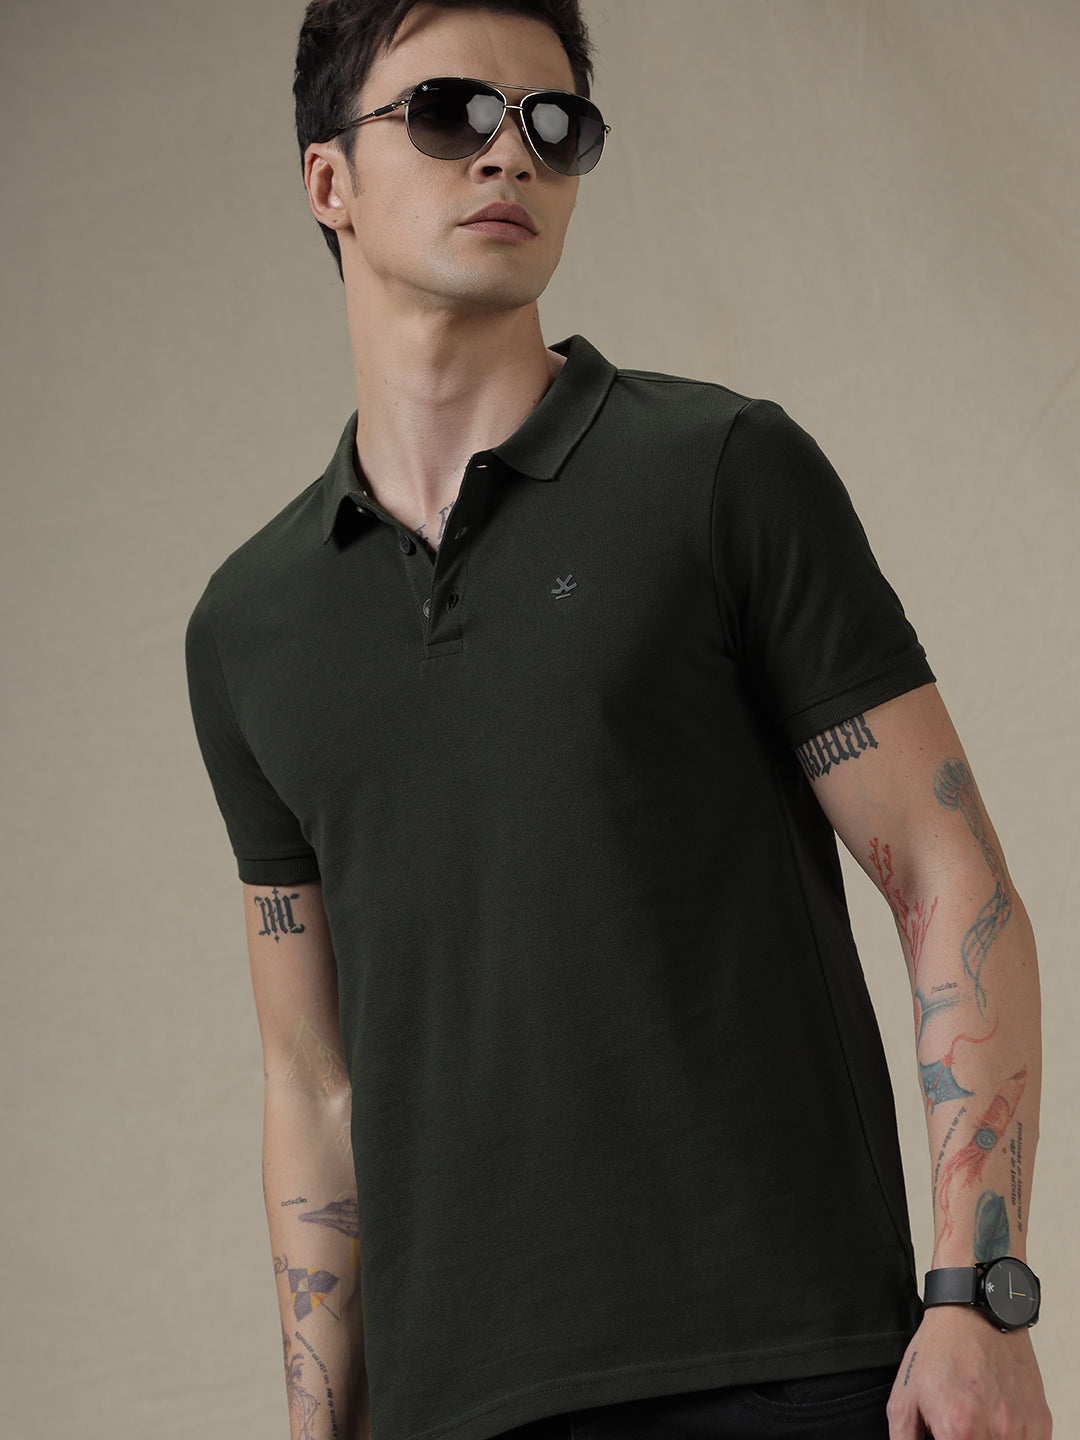 Solid Olive Elite Polo T-Shirt